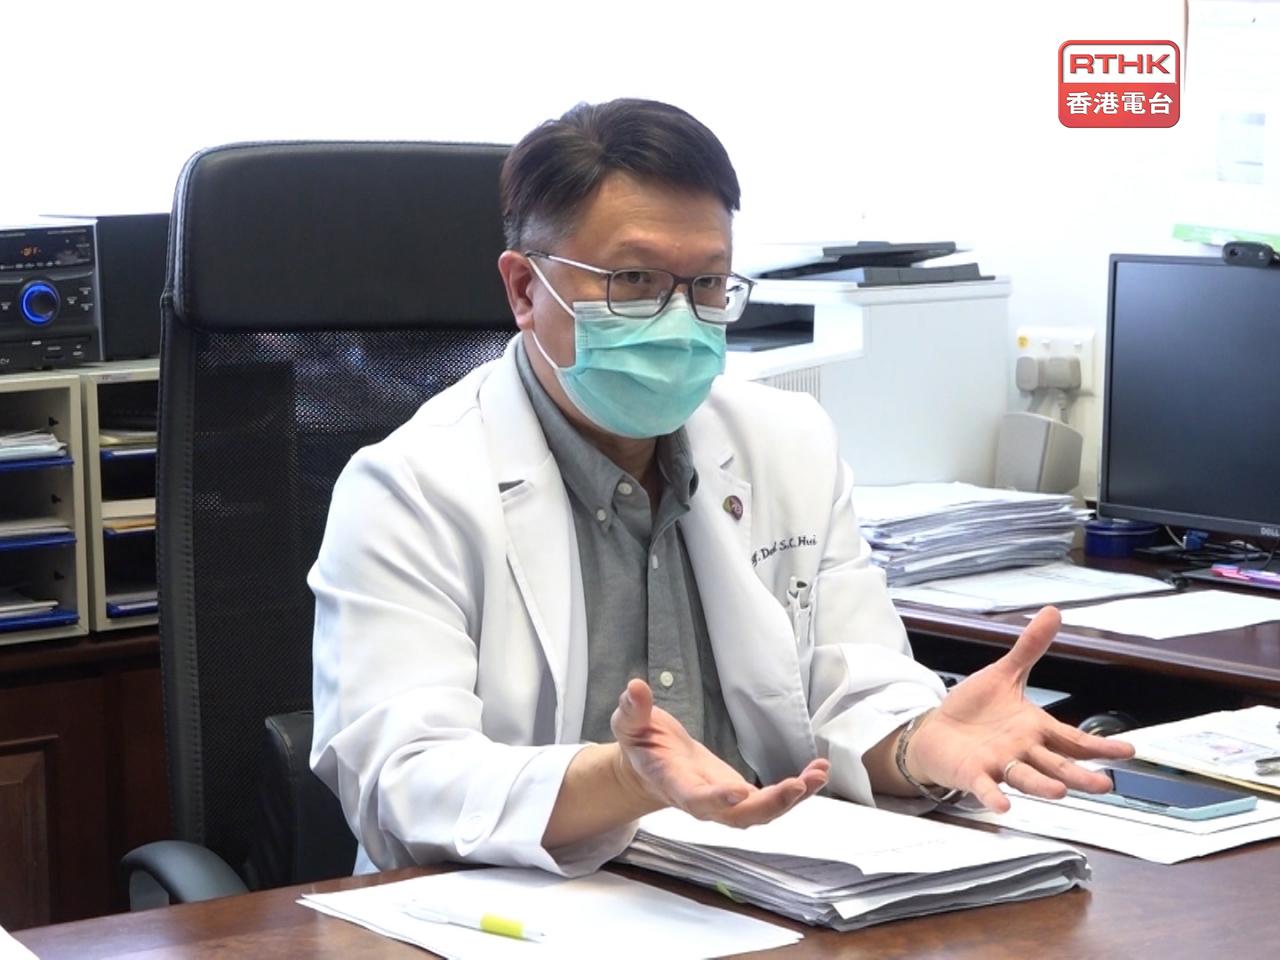 David Hui said if hospitals are filled with serious Covid patients because of the border reopening, there may be a need to lower the travel quota. File photo: RTHK